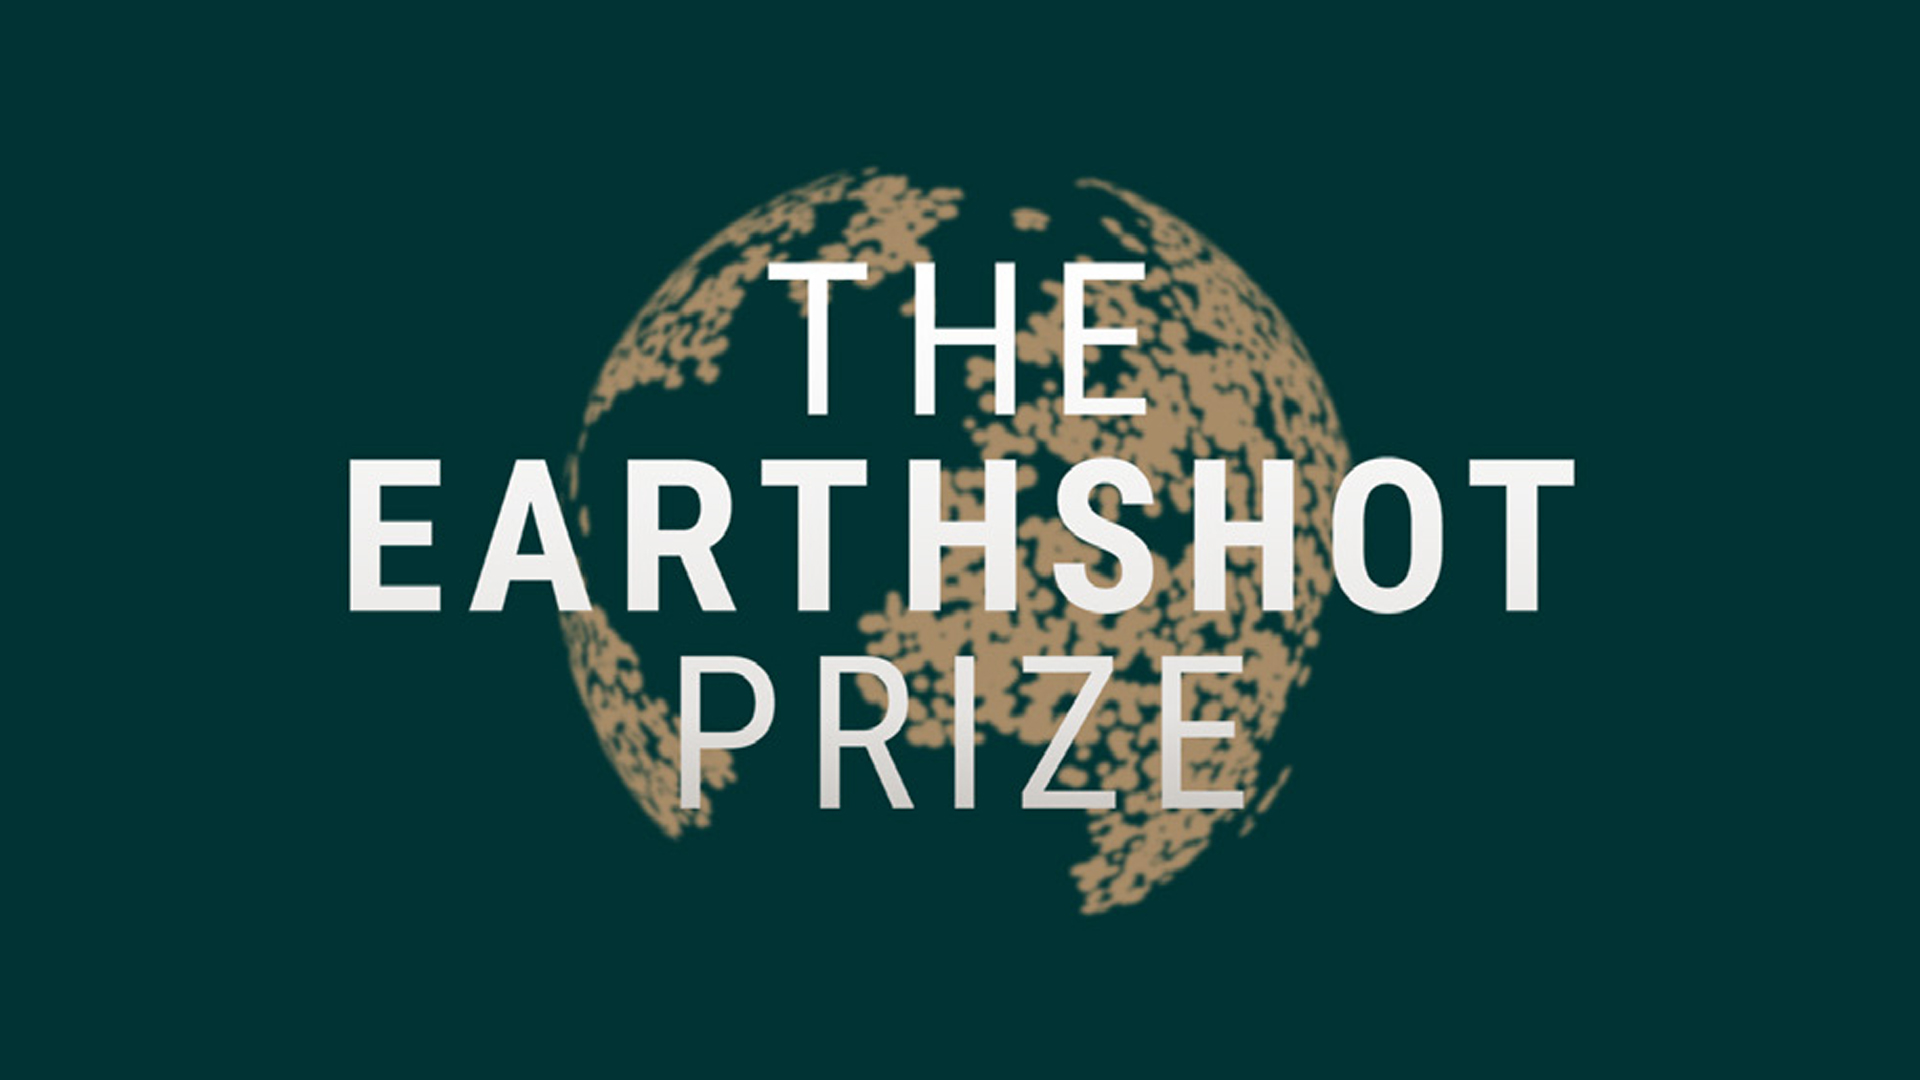 The Earthshot prize